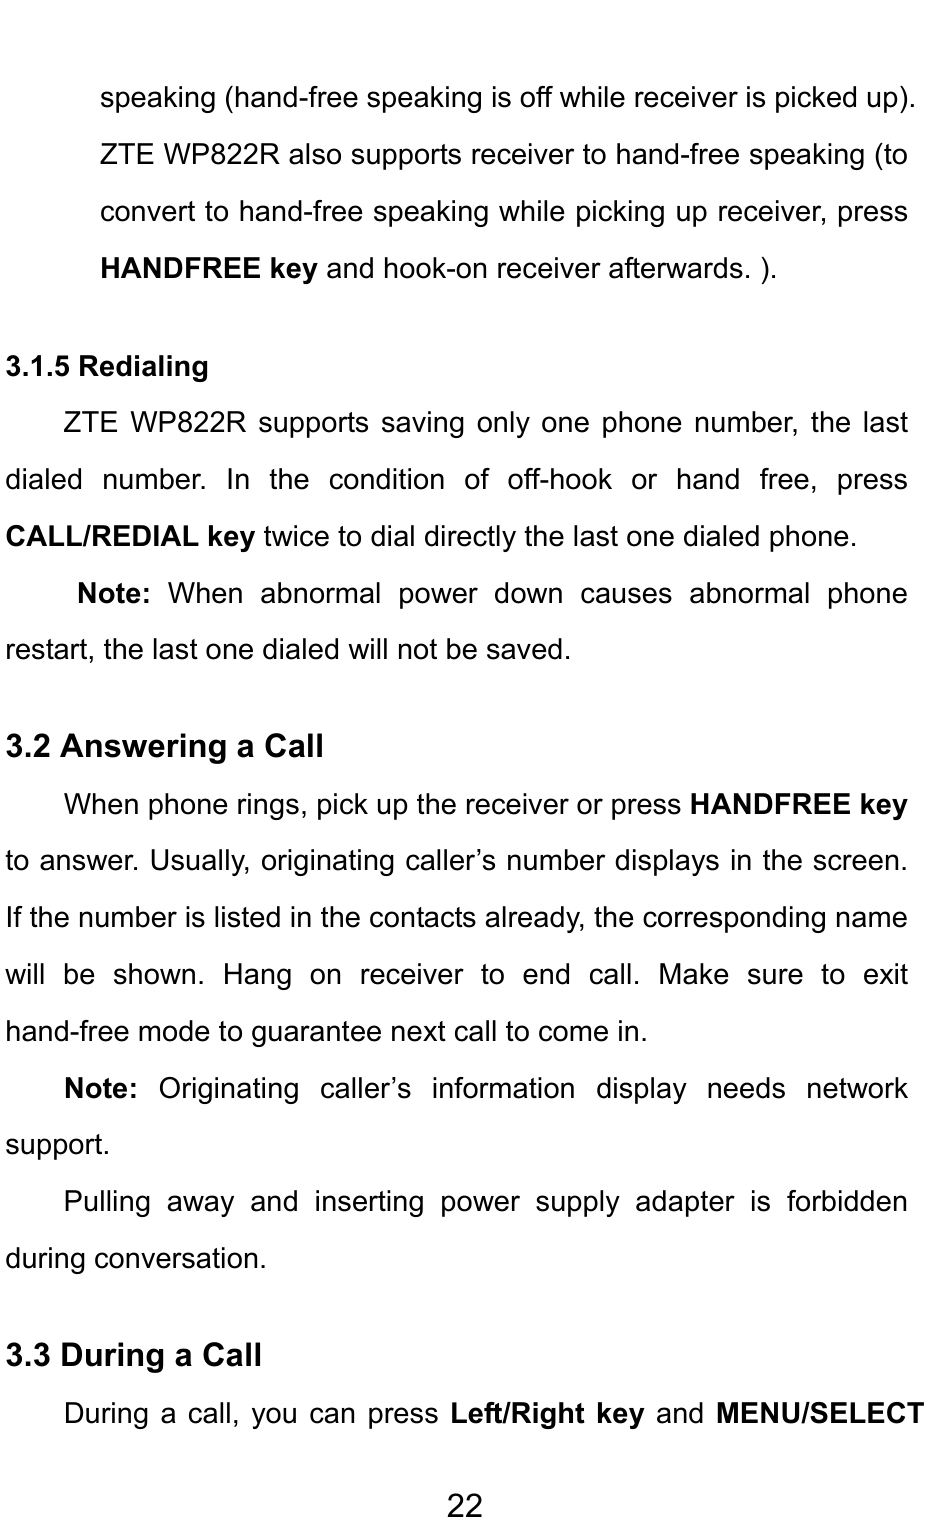                                     22speaking (hand-free speaking is off while receiver is picked up). ZTE WP822R also supports receiver to hand-free speaking (to convert to hand-free speaking while picking up receiver, press HANDFREE key and hook-on receiver afterwards. ).   3.1.5 Redialing ZTE WP822R supports saving only one phone number, the last dialed number. In the condition of off-hook or hand free, press CALL/REDIAL key twice to dial directly the last one dialed phone. Note: When abnormal power down causes abnormal phone restart, the last one dialed will not be saved. 3.2 Answering a Call When phone rings, pick up the receiver or press HANDFREE key to answer. Usually, originating caller’s number displays in the screen. If the number is listed in the contacts already, the corresponding name will be shown. Hang on receiver to end call. Make sure to exit hand-free mode to guarantee next call to come in.   Note:  Originating caller’s information display needs network support. Pulling away and inserting power supply adapter is forbidden during conversation. 3.3 During a Call During a call, you can press Left/Right key and  MENU/SELECT 